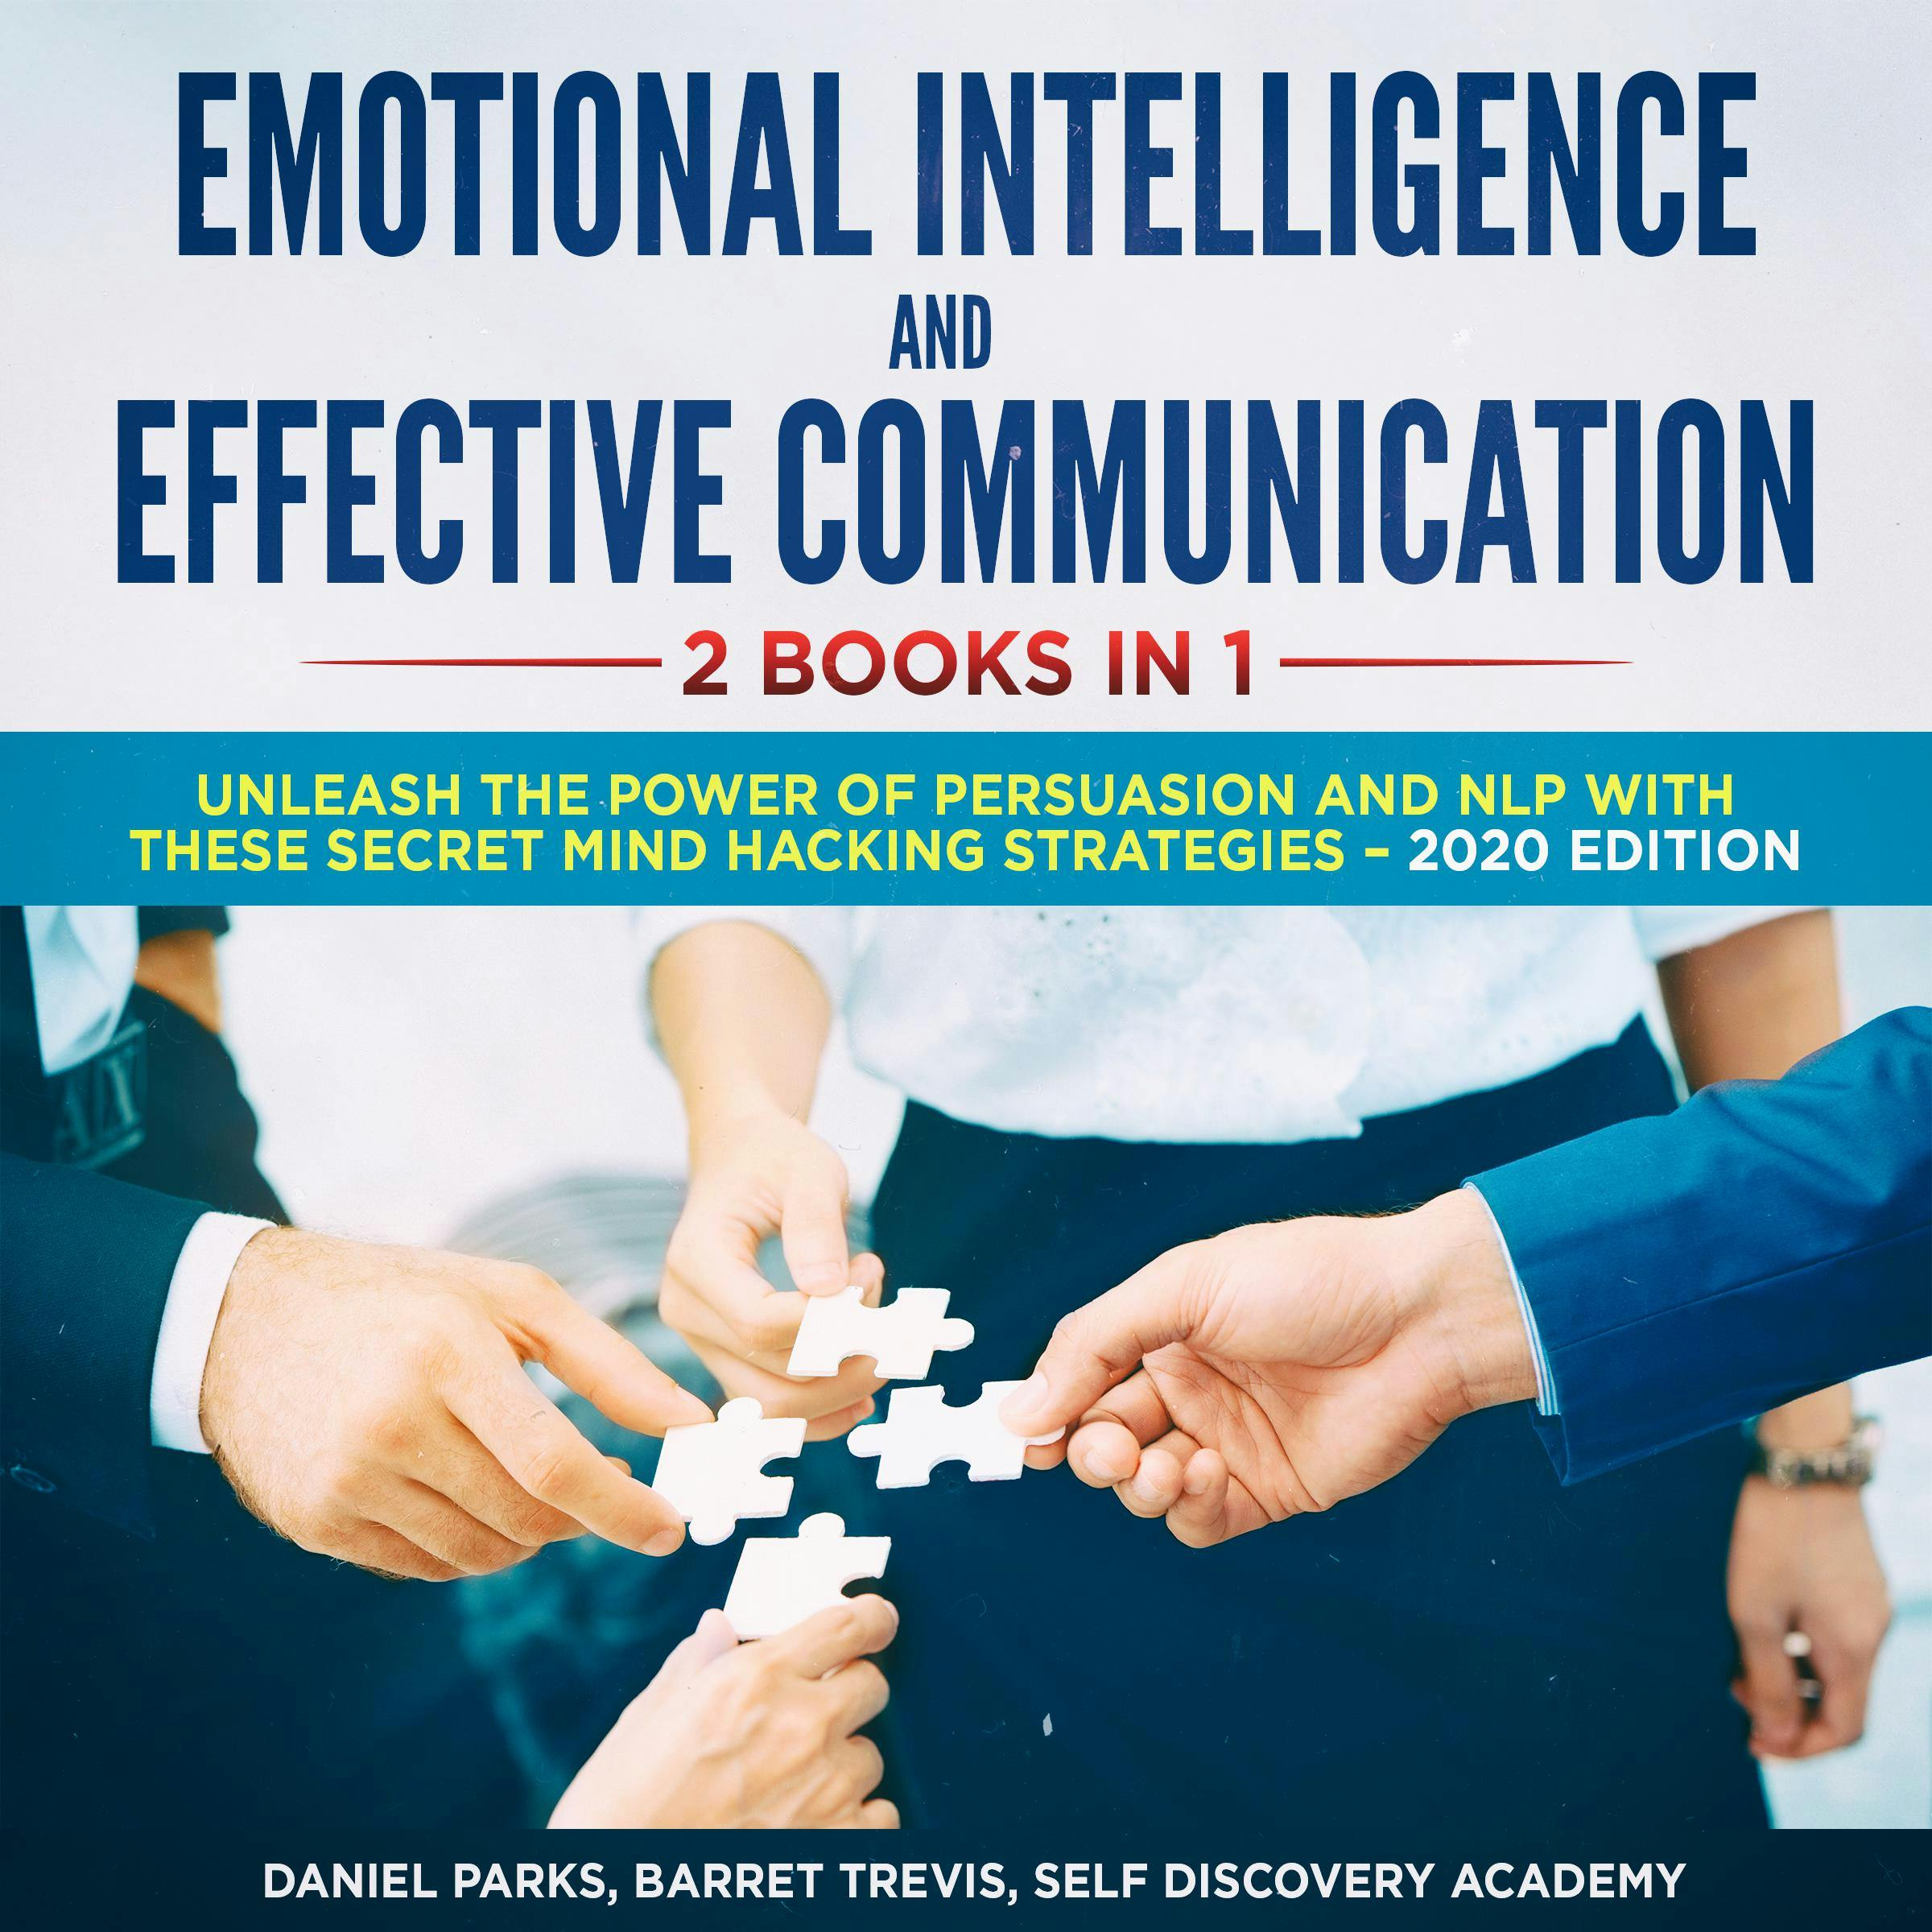 Emotional Intelligence and Effective Communication 2 Books in 1: Unleash the Power of Persuasion and NLP with these secret Mind Hacking Strategies - undefined